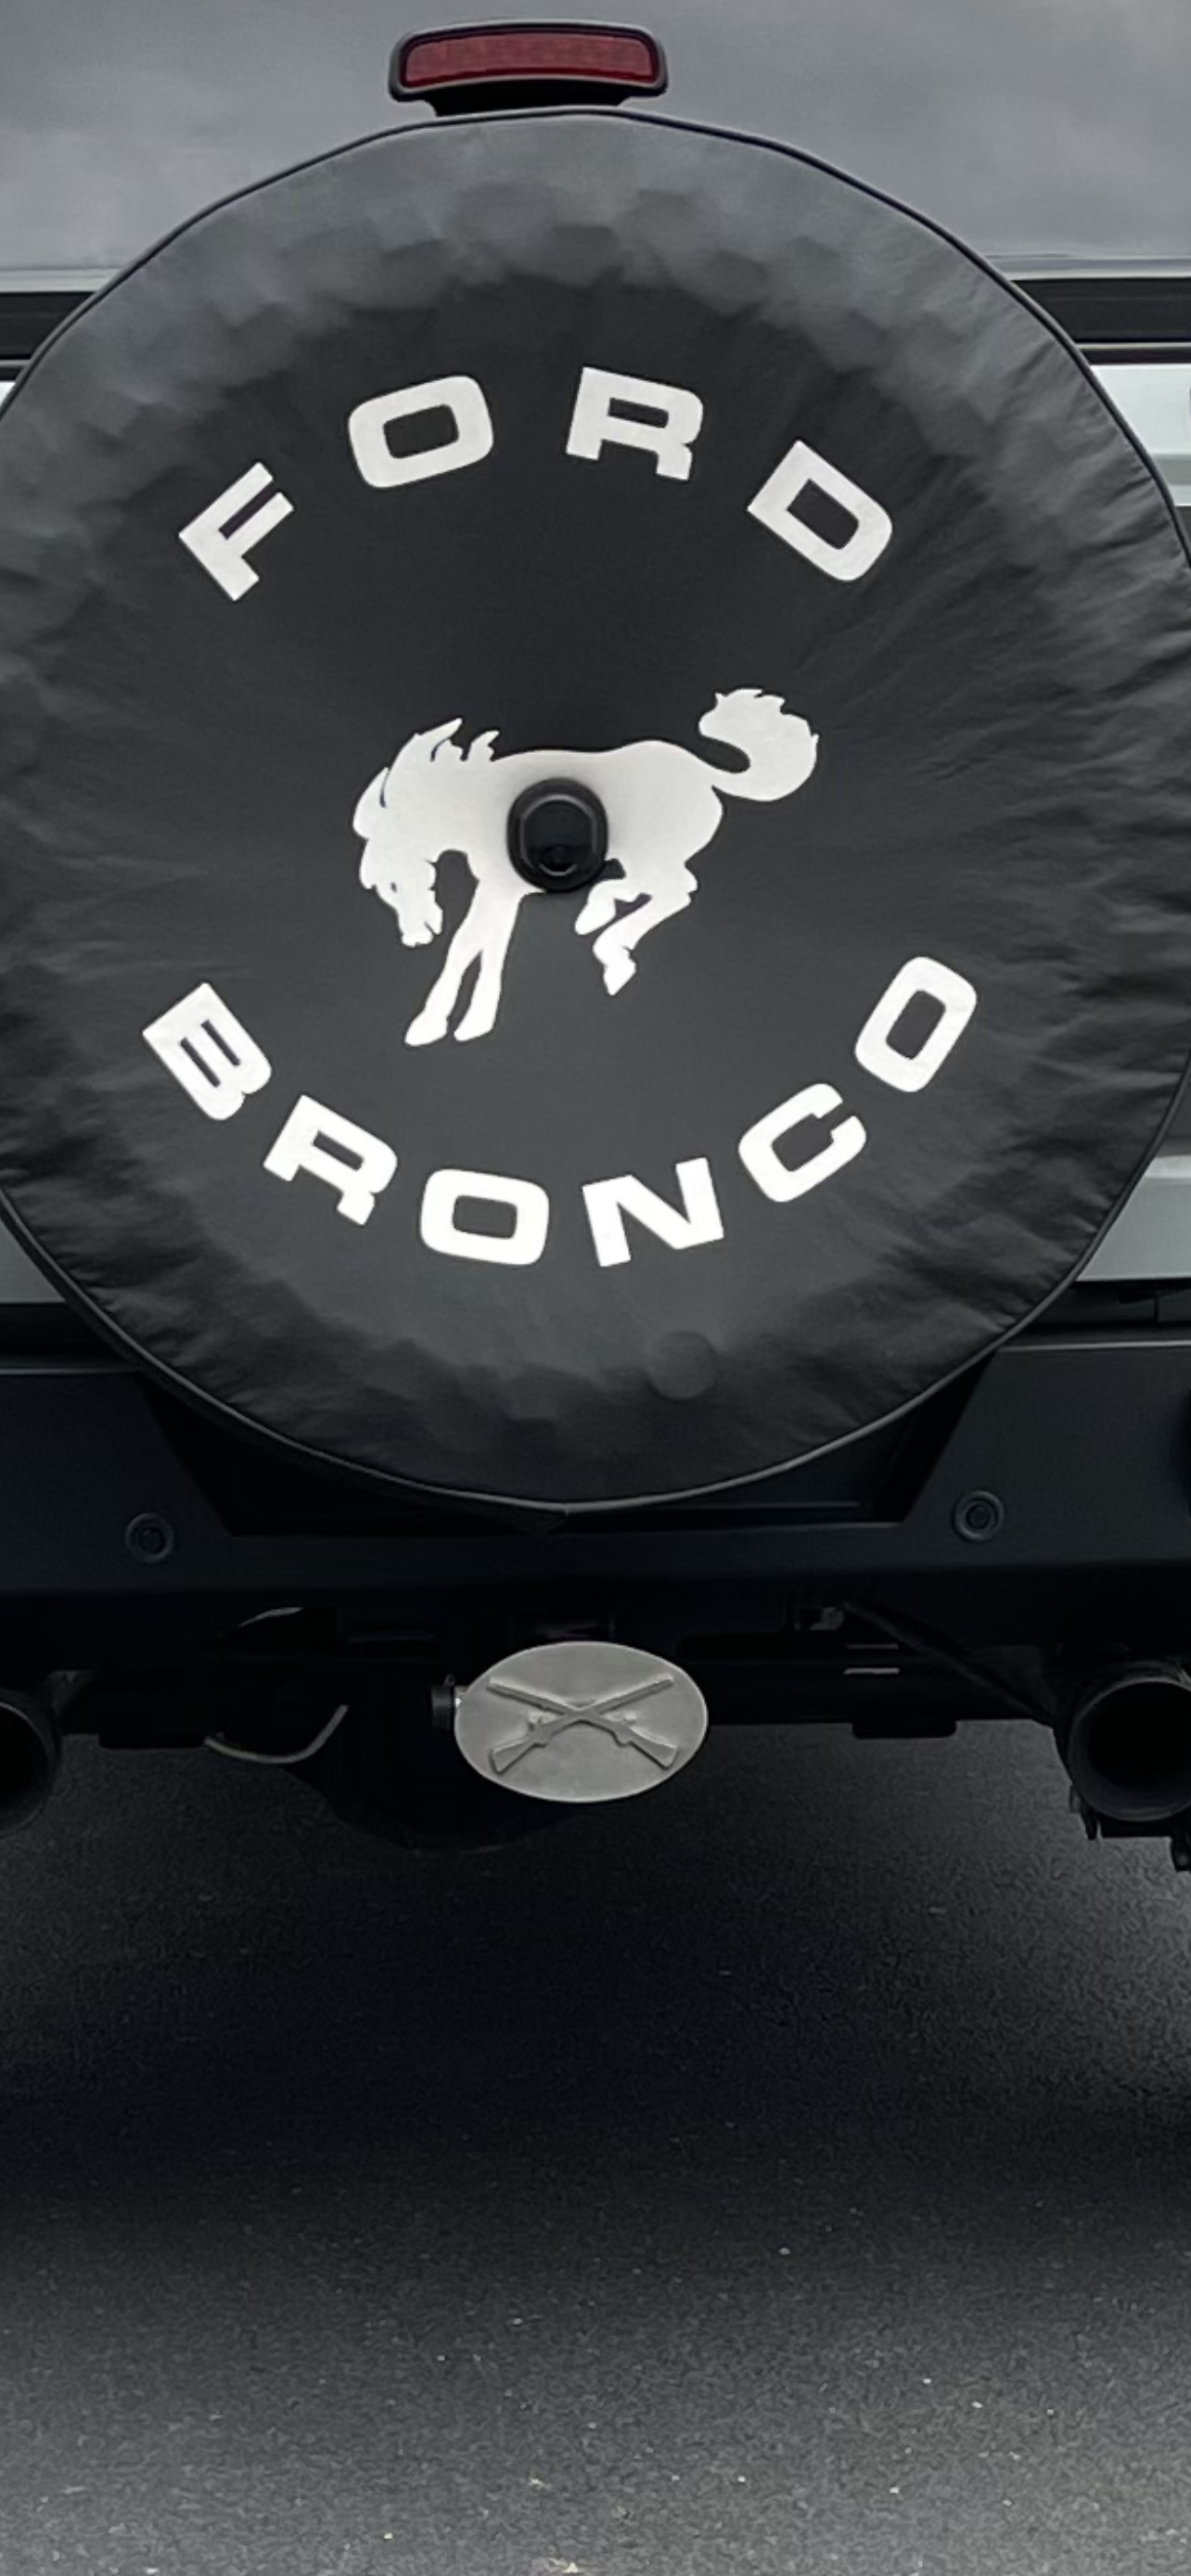 Ford Bronco Hitch Covers - Let's See What You've Got BD852340-3CC5-4C1D-B620-7EFB1872381B